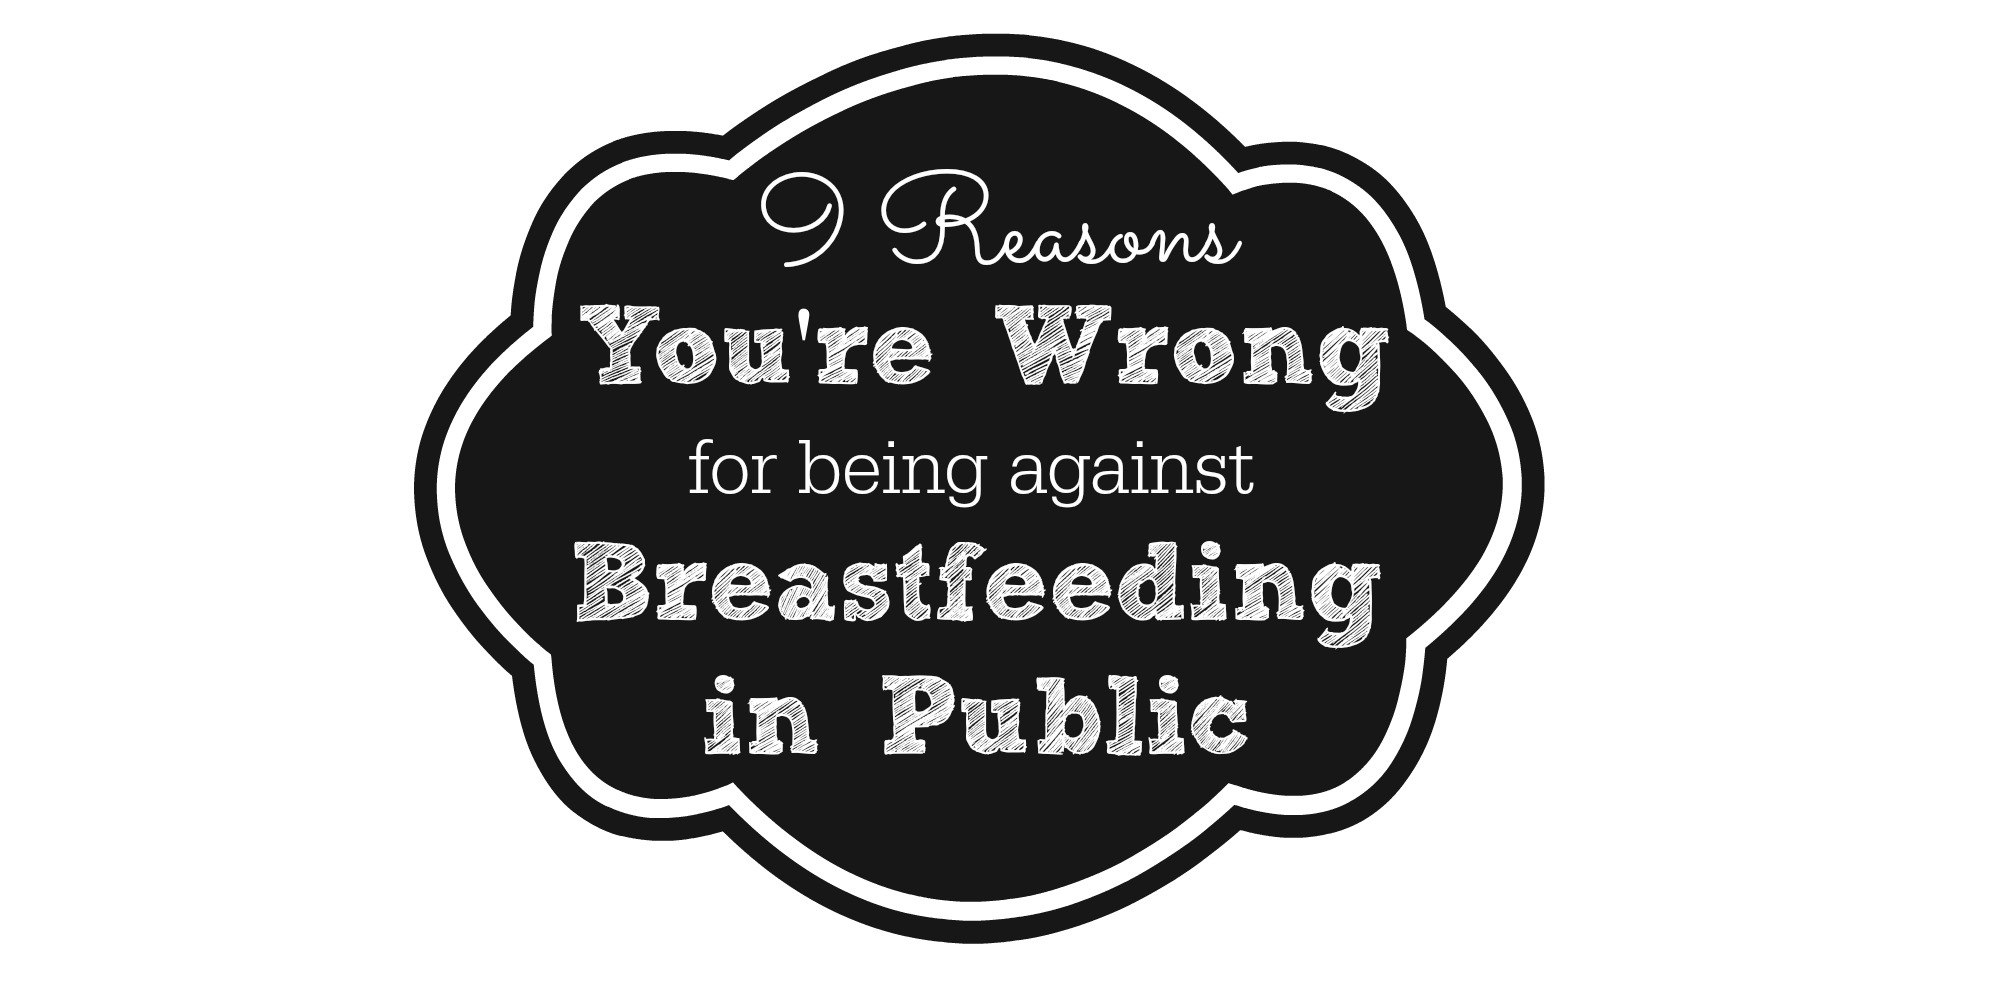 9 Reasons You're Wrong for Being Against Breastfeeding in Public